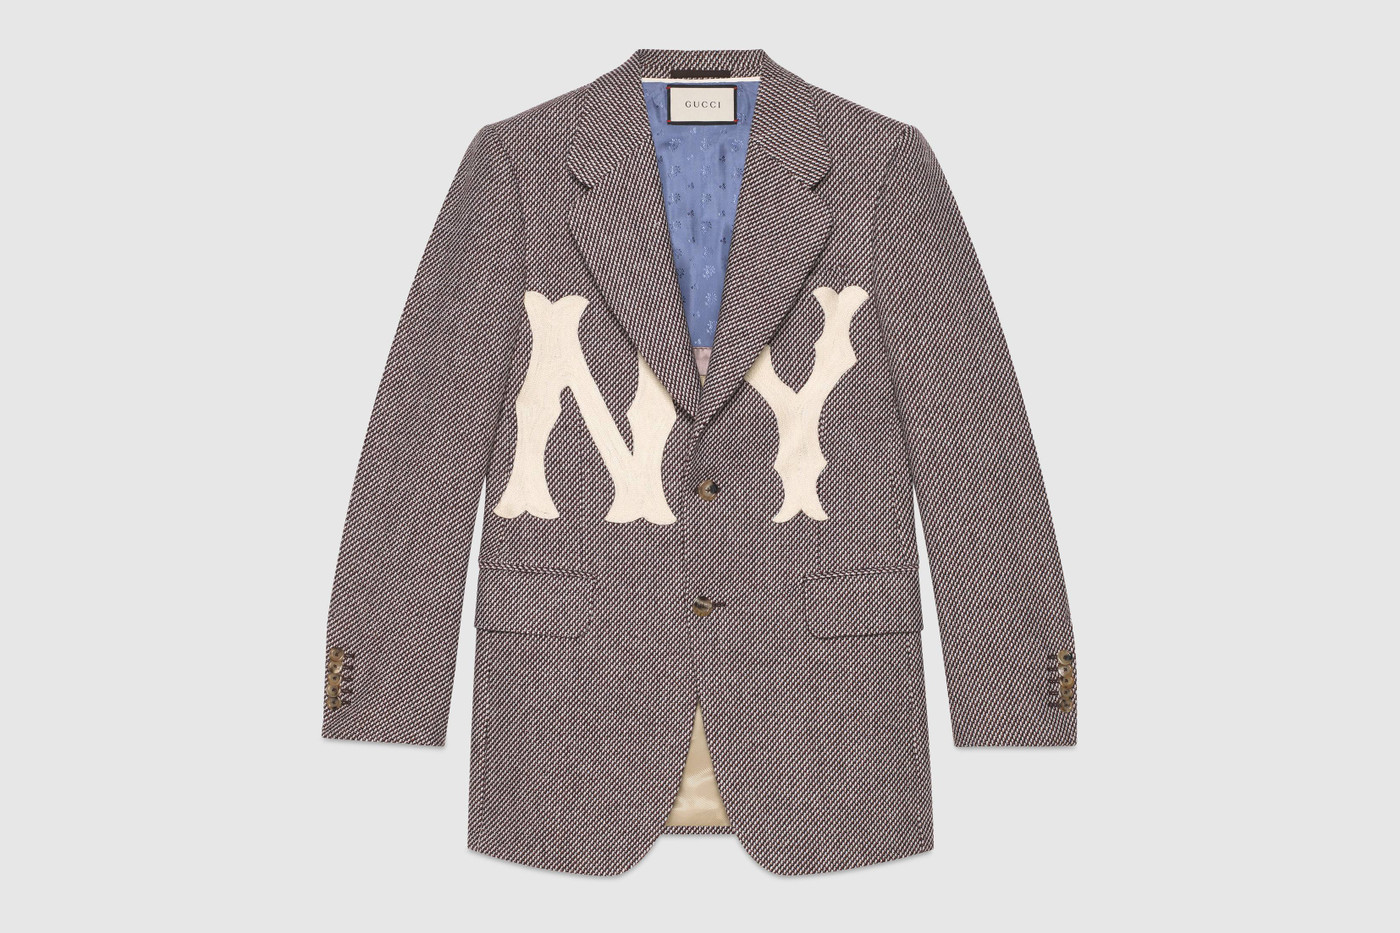 NY Yankees With a New Capsule Collection